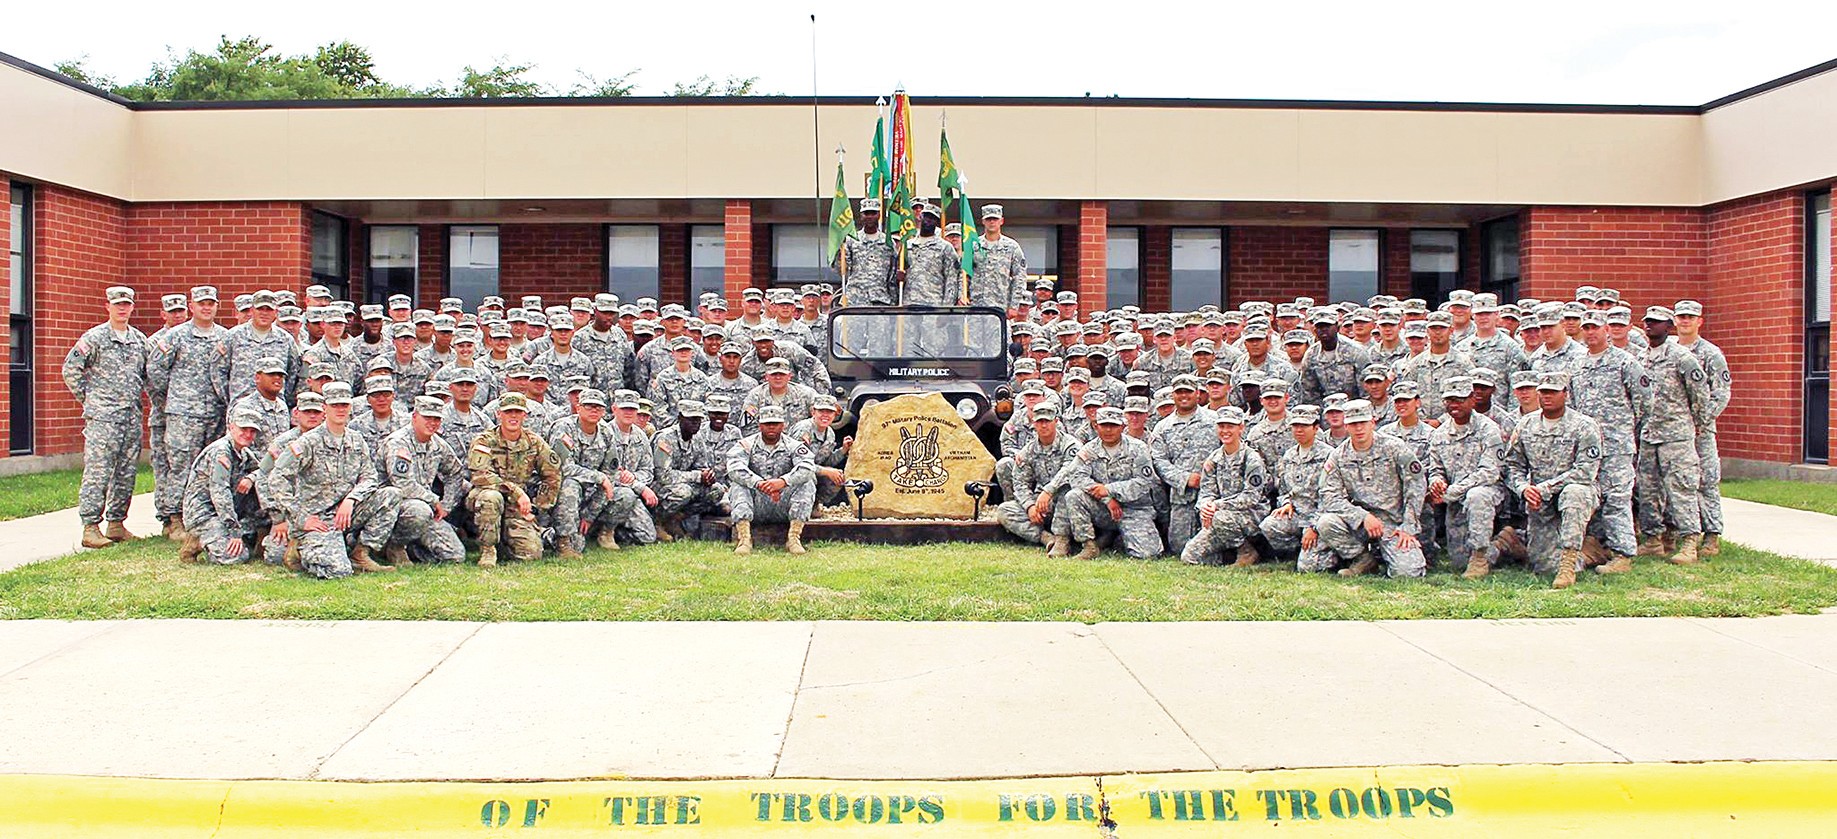 97th Military Police Battalion from Fort Riley, Kansas, remembers 50th anniversary of deployment